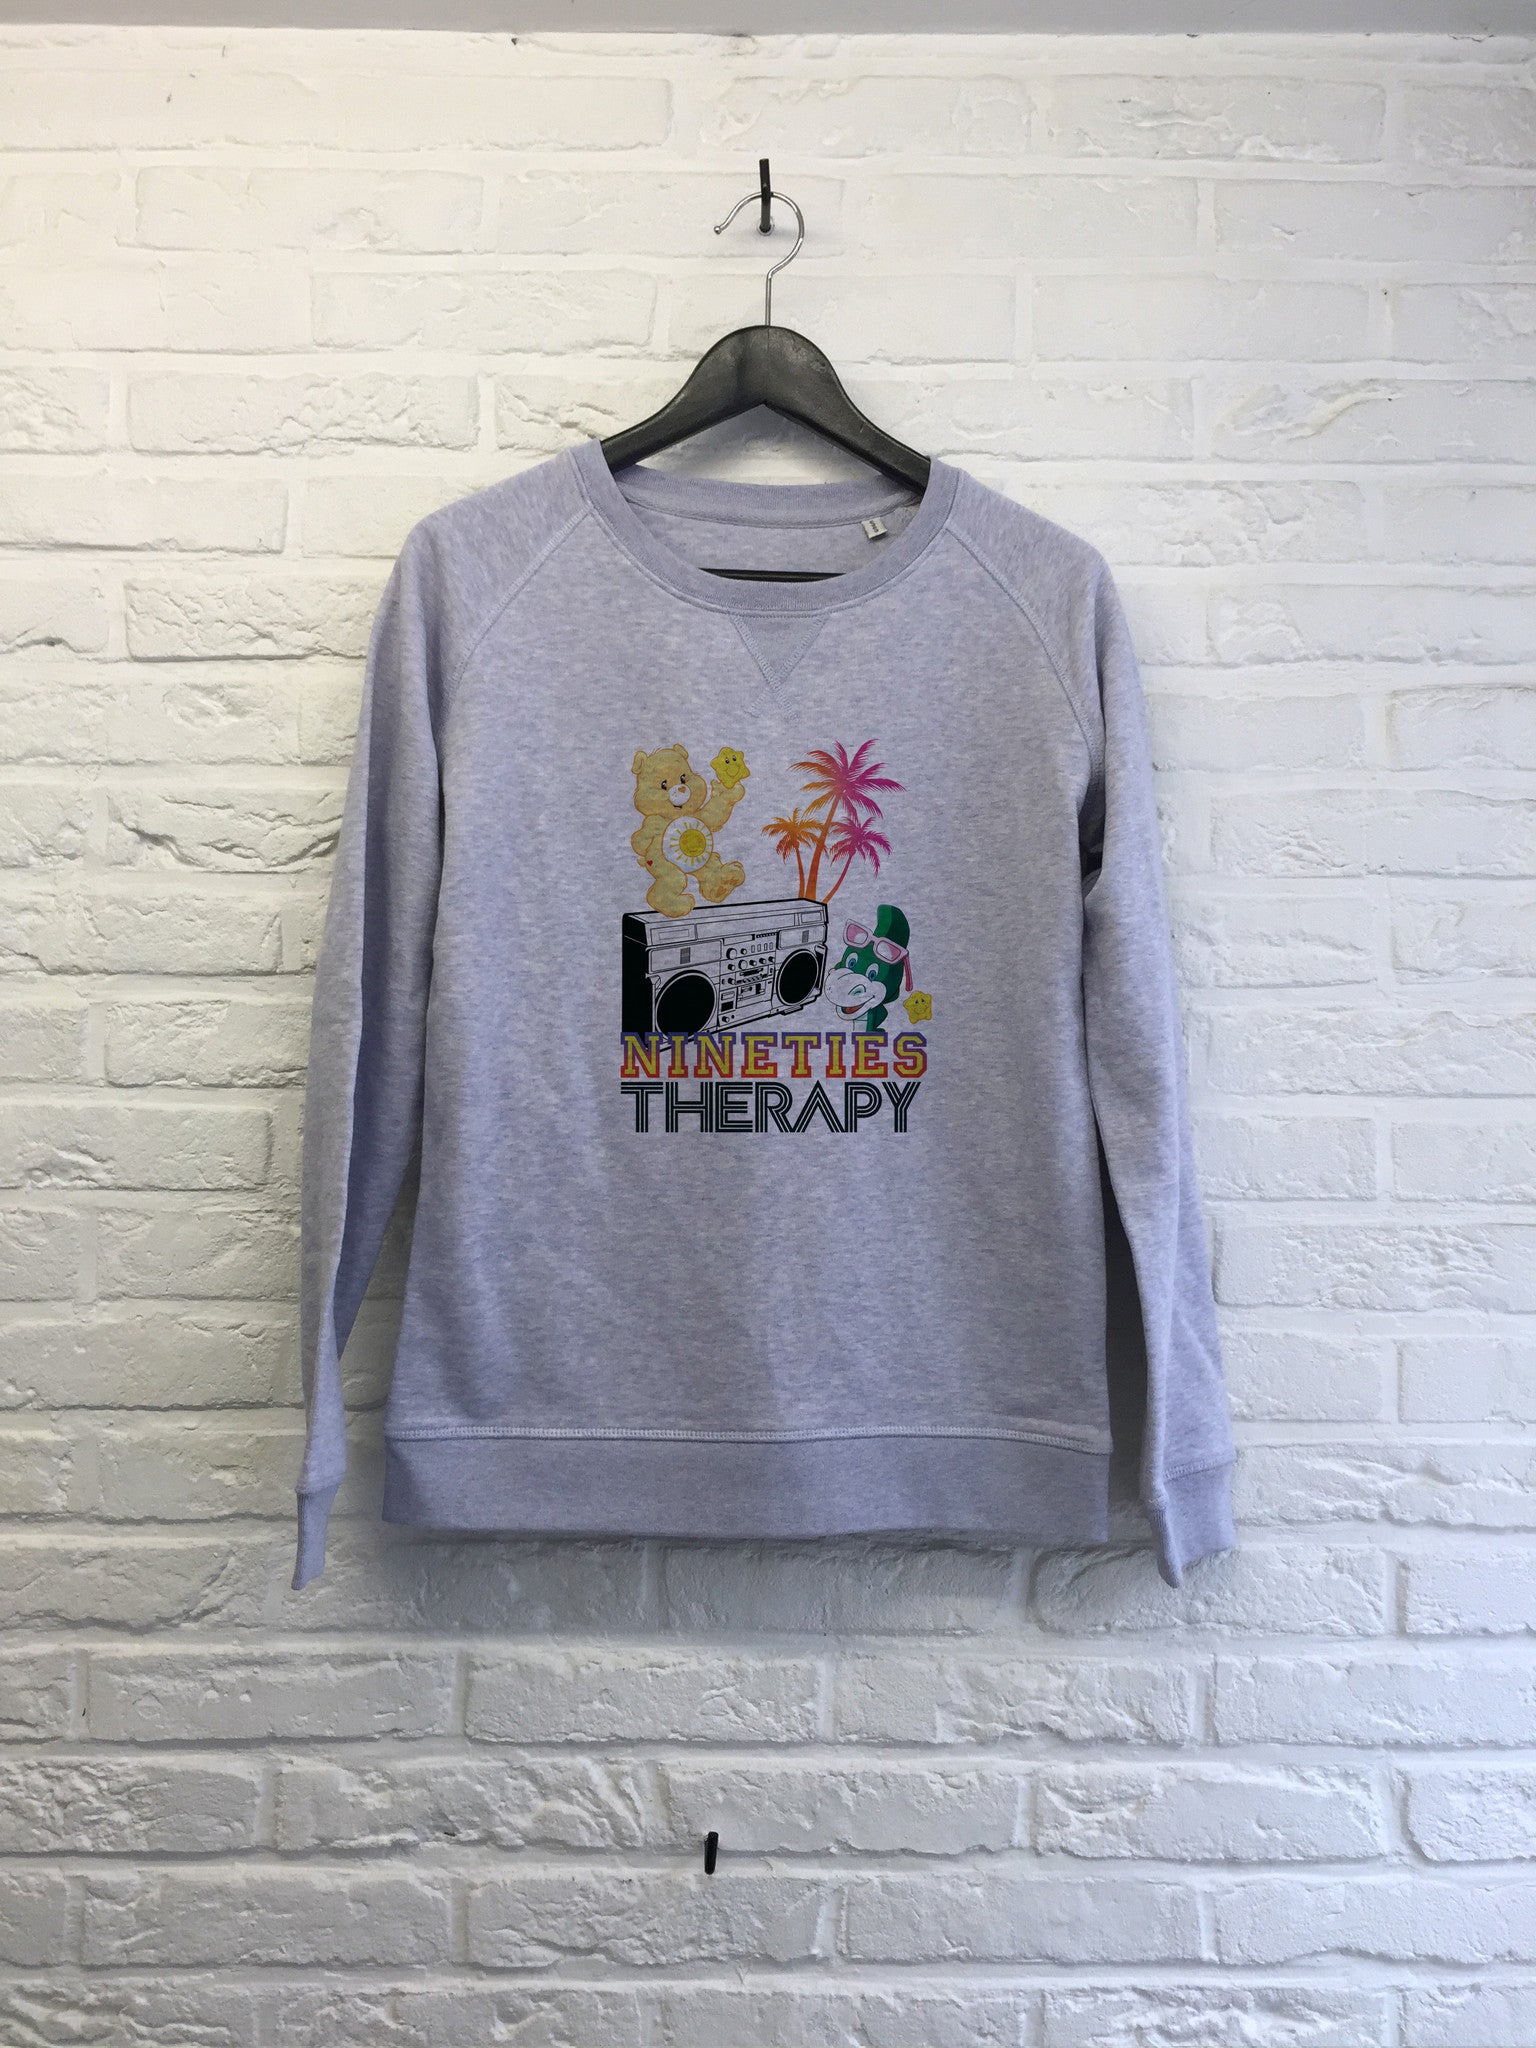 Nineties therapy - Sweat Femme-Sweat shirts-Atelier Amelot